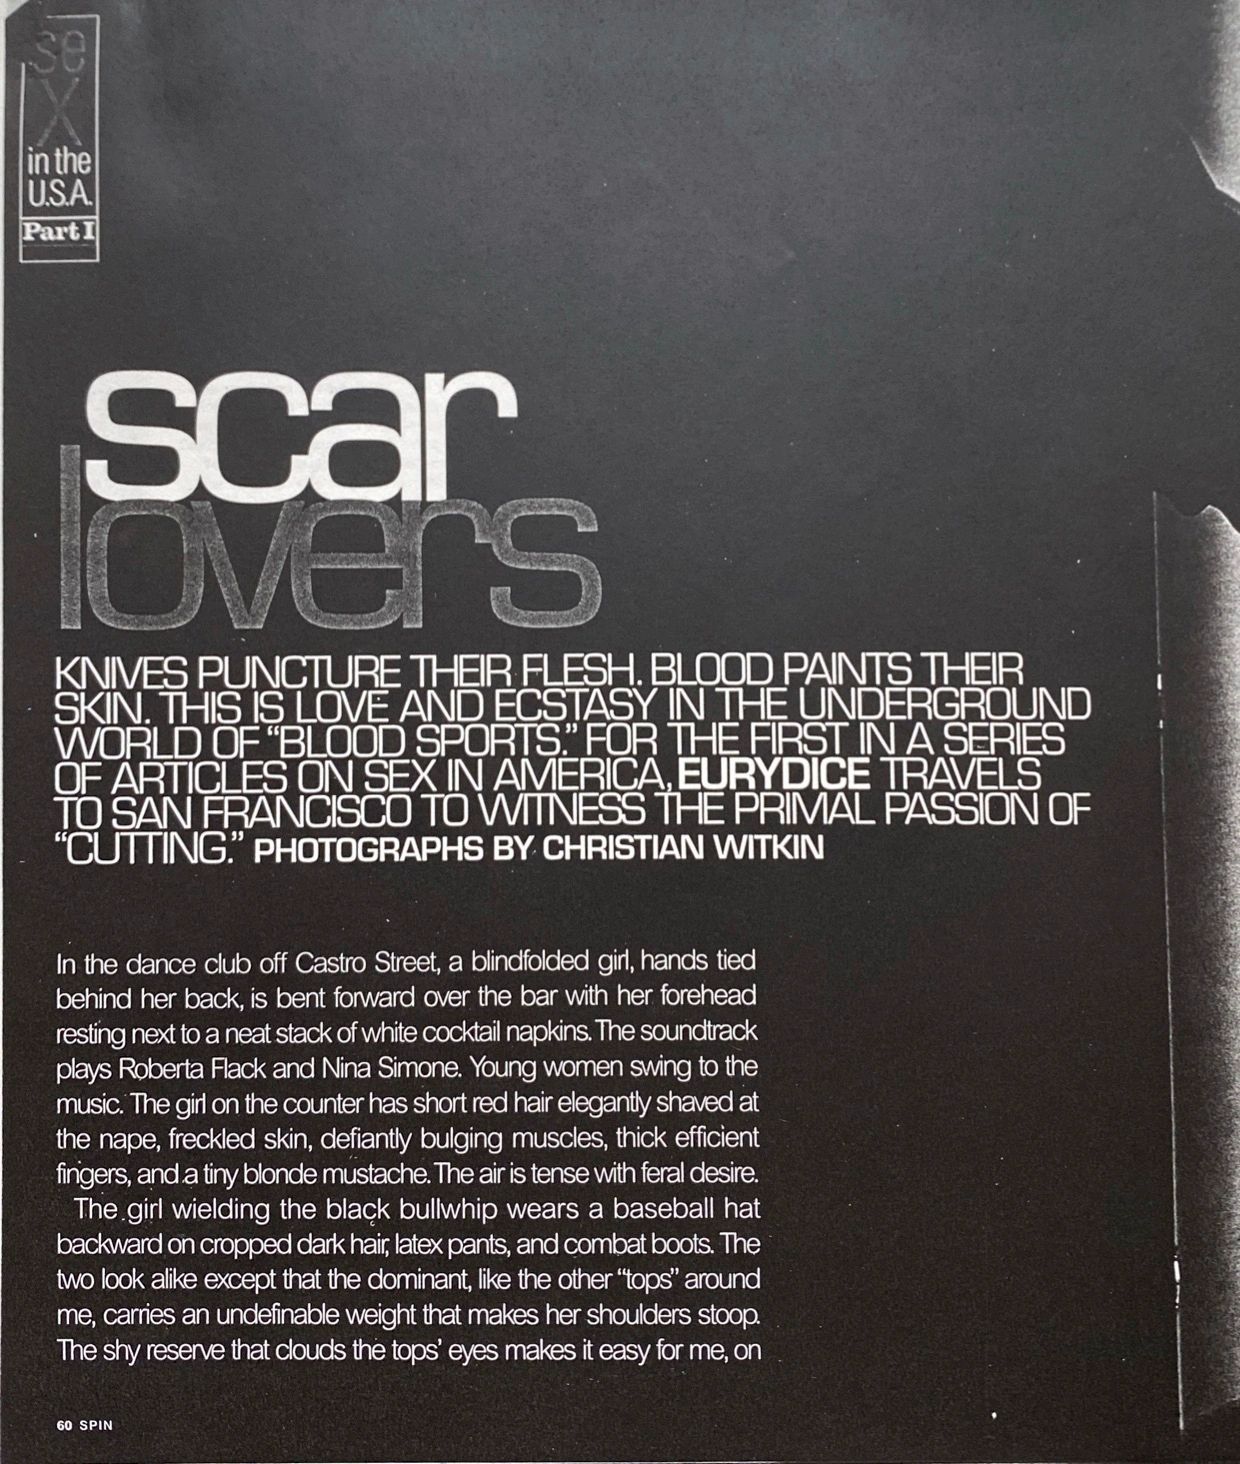 scar lovers by eve eurydice article. spin magazine staff writer